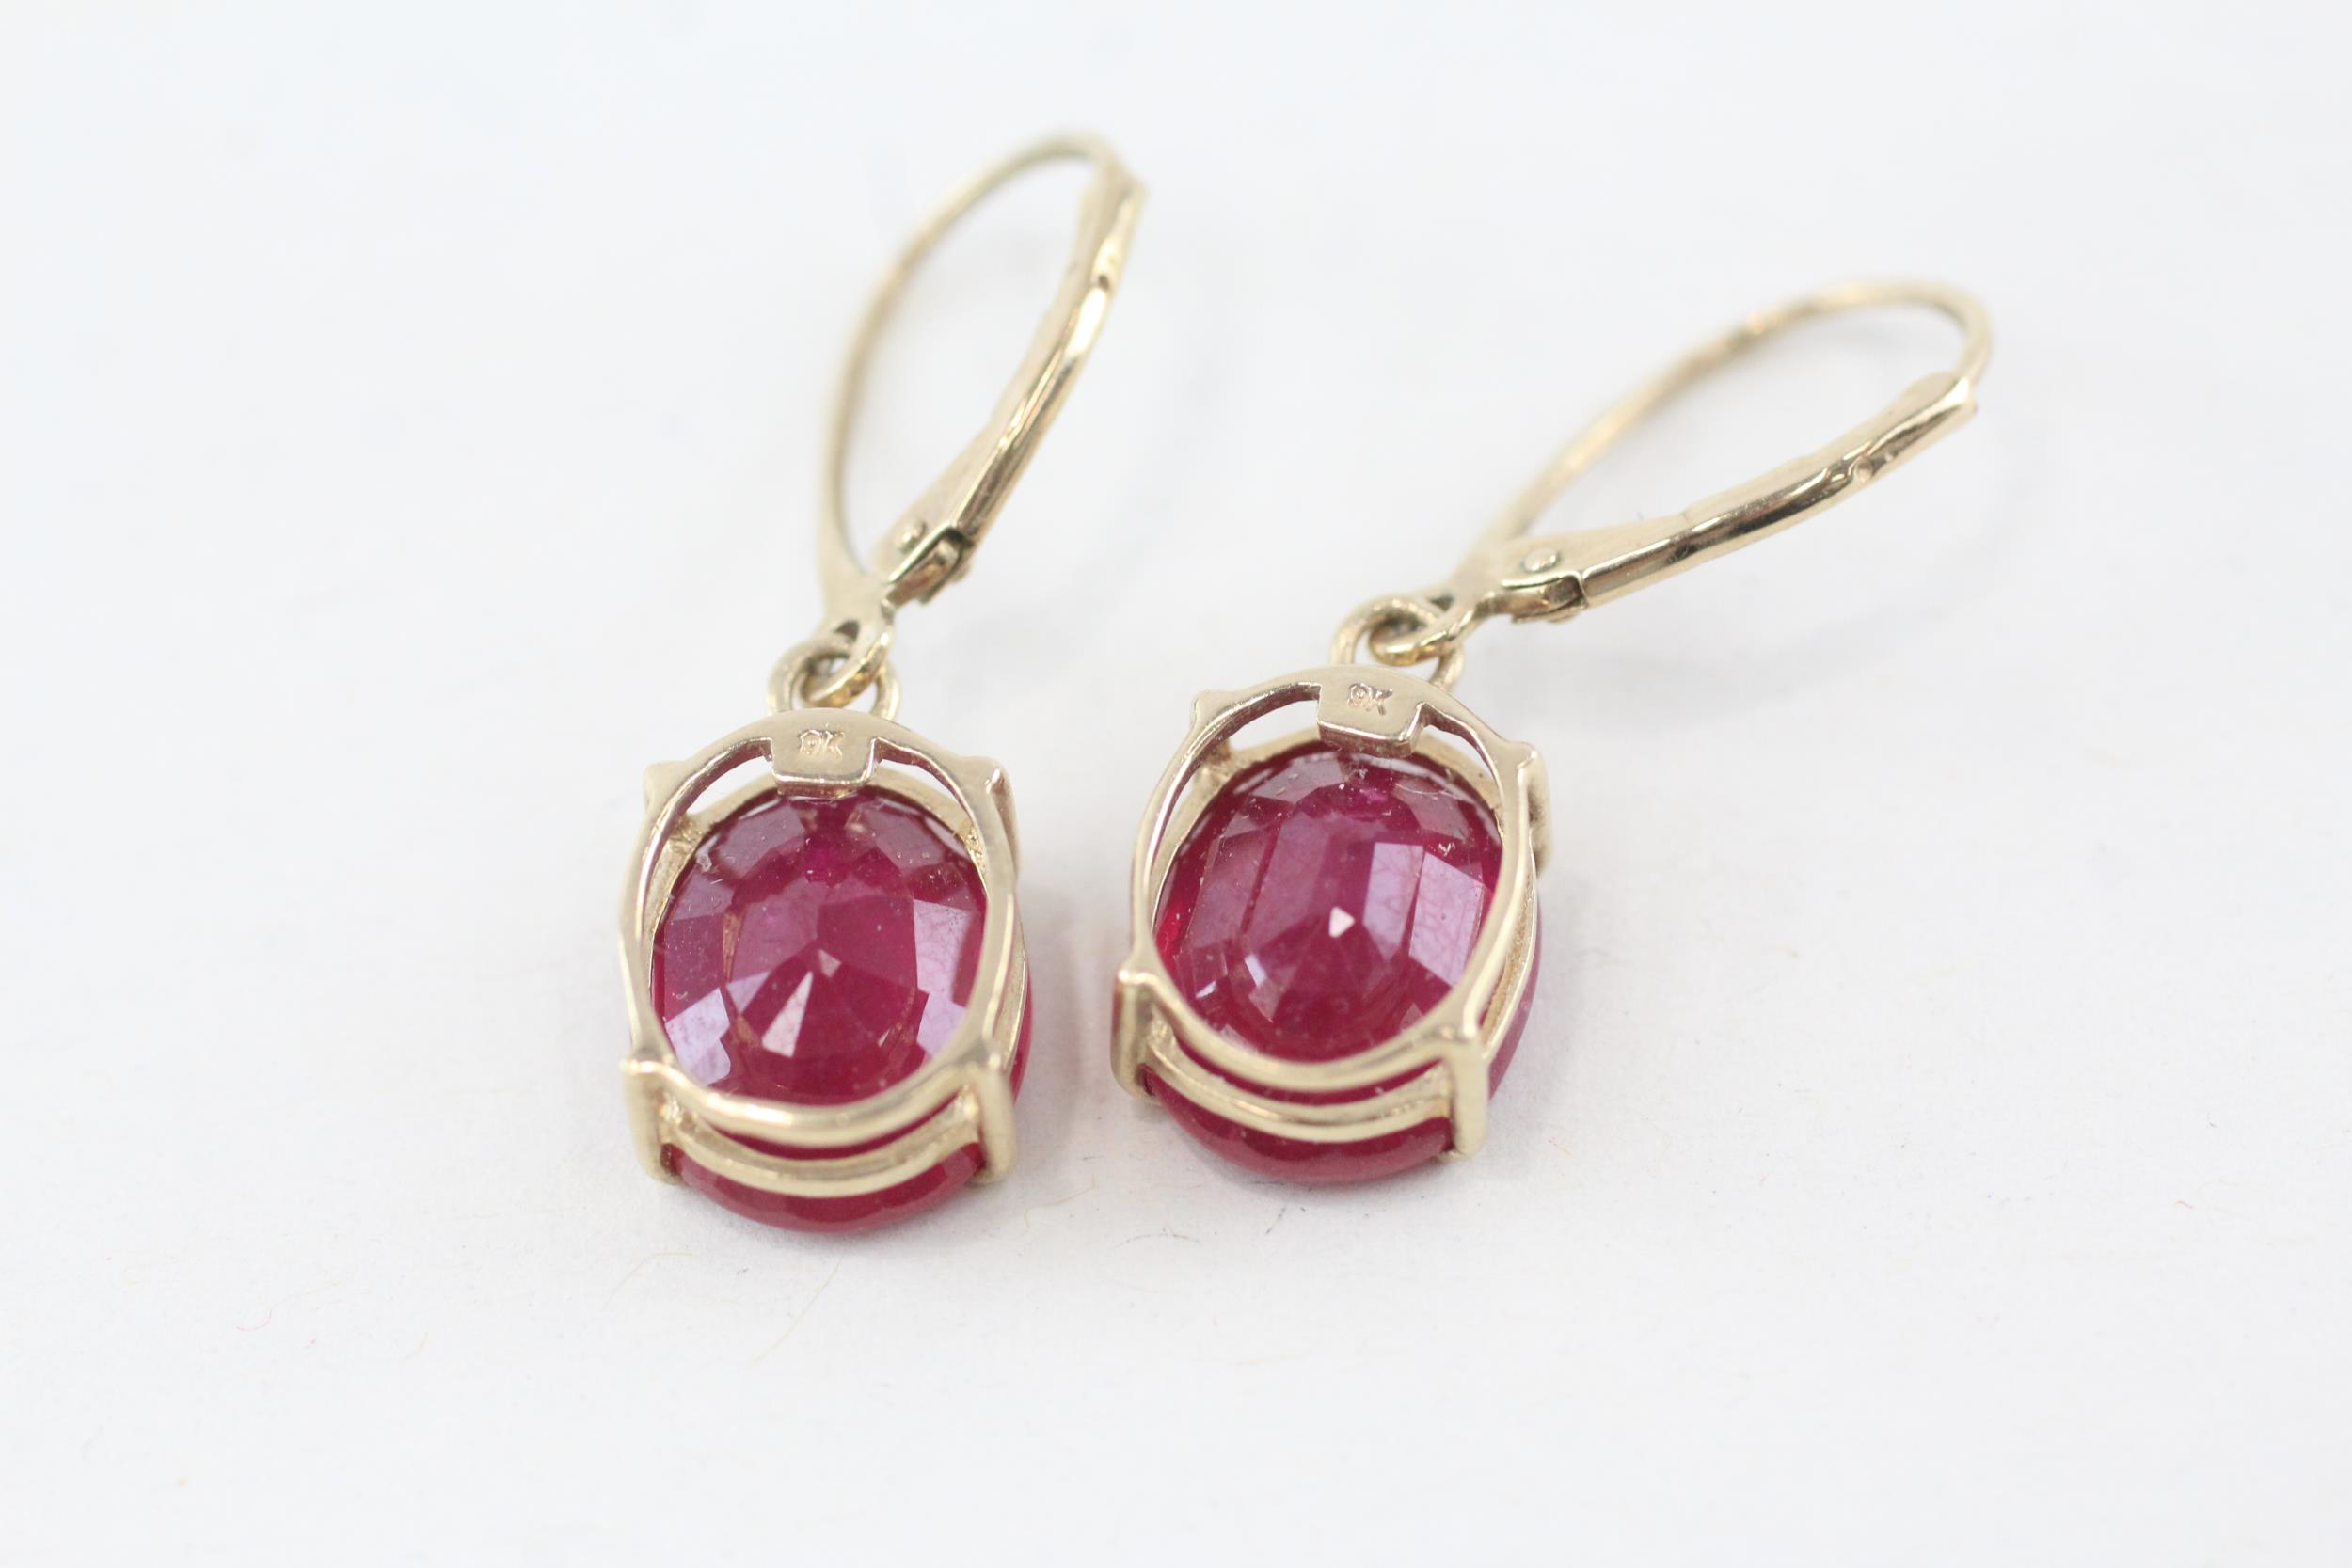 9ct gold enhanced ruby set leverback earrings - 175 g - Image 3 of 4